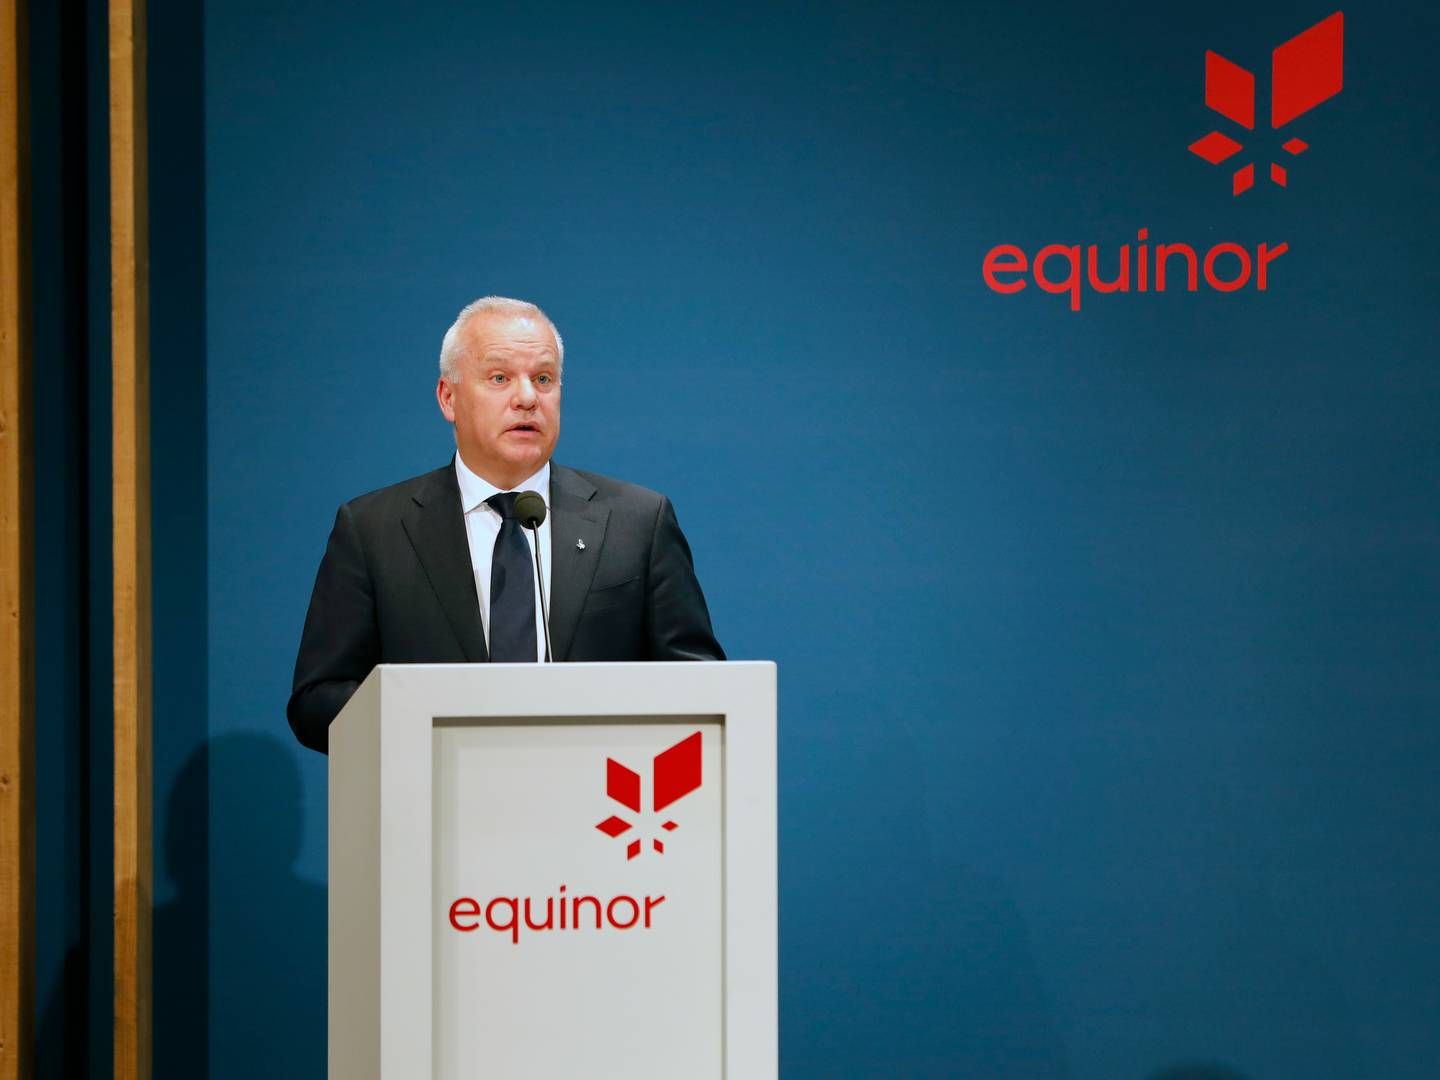 Norwegian Equinor achieved lower prices in the second quarter but got more production from its fields. The picture shows CEO Anders Opedal. | Photo: Equinor